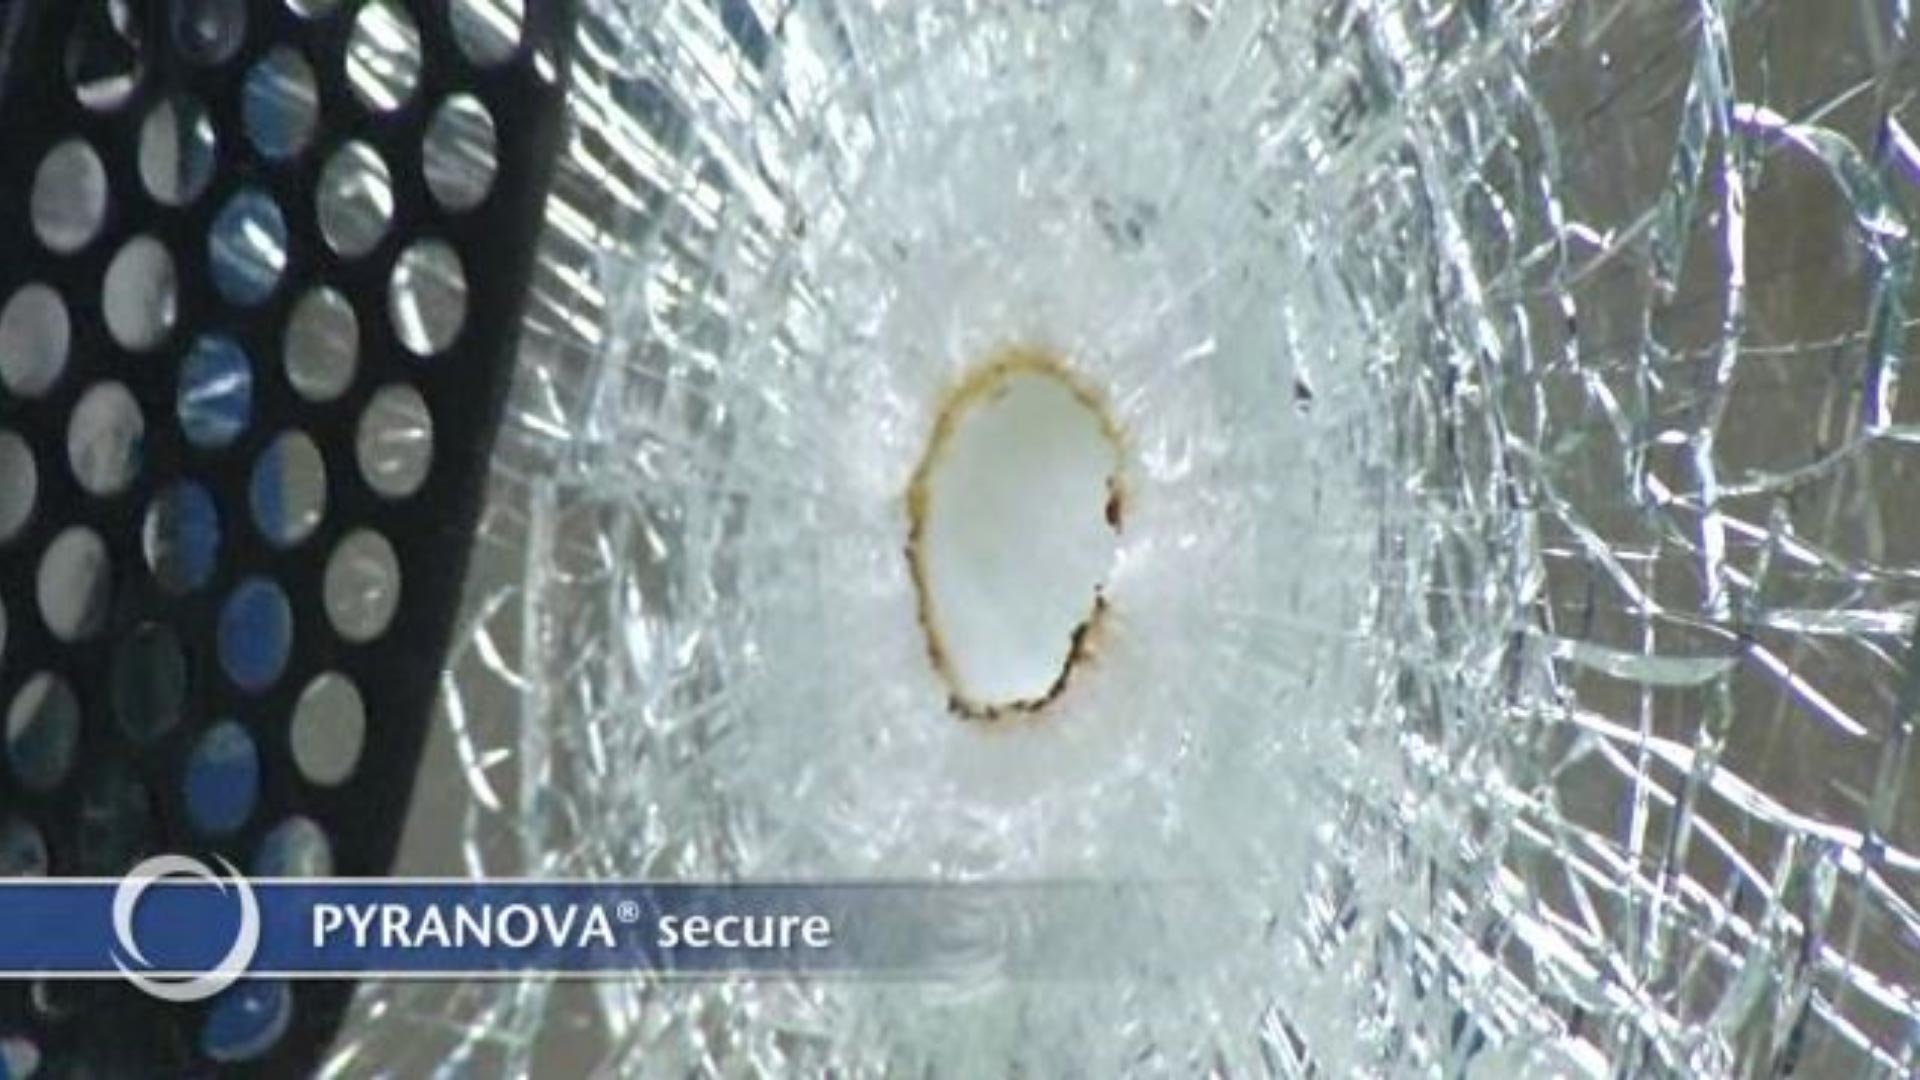 Video showing what happens when PYRANOVA® secure comes under attack from heat, fire and bullets